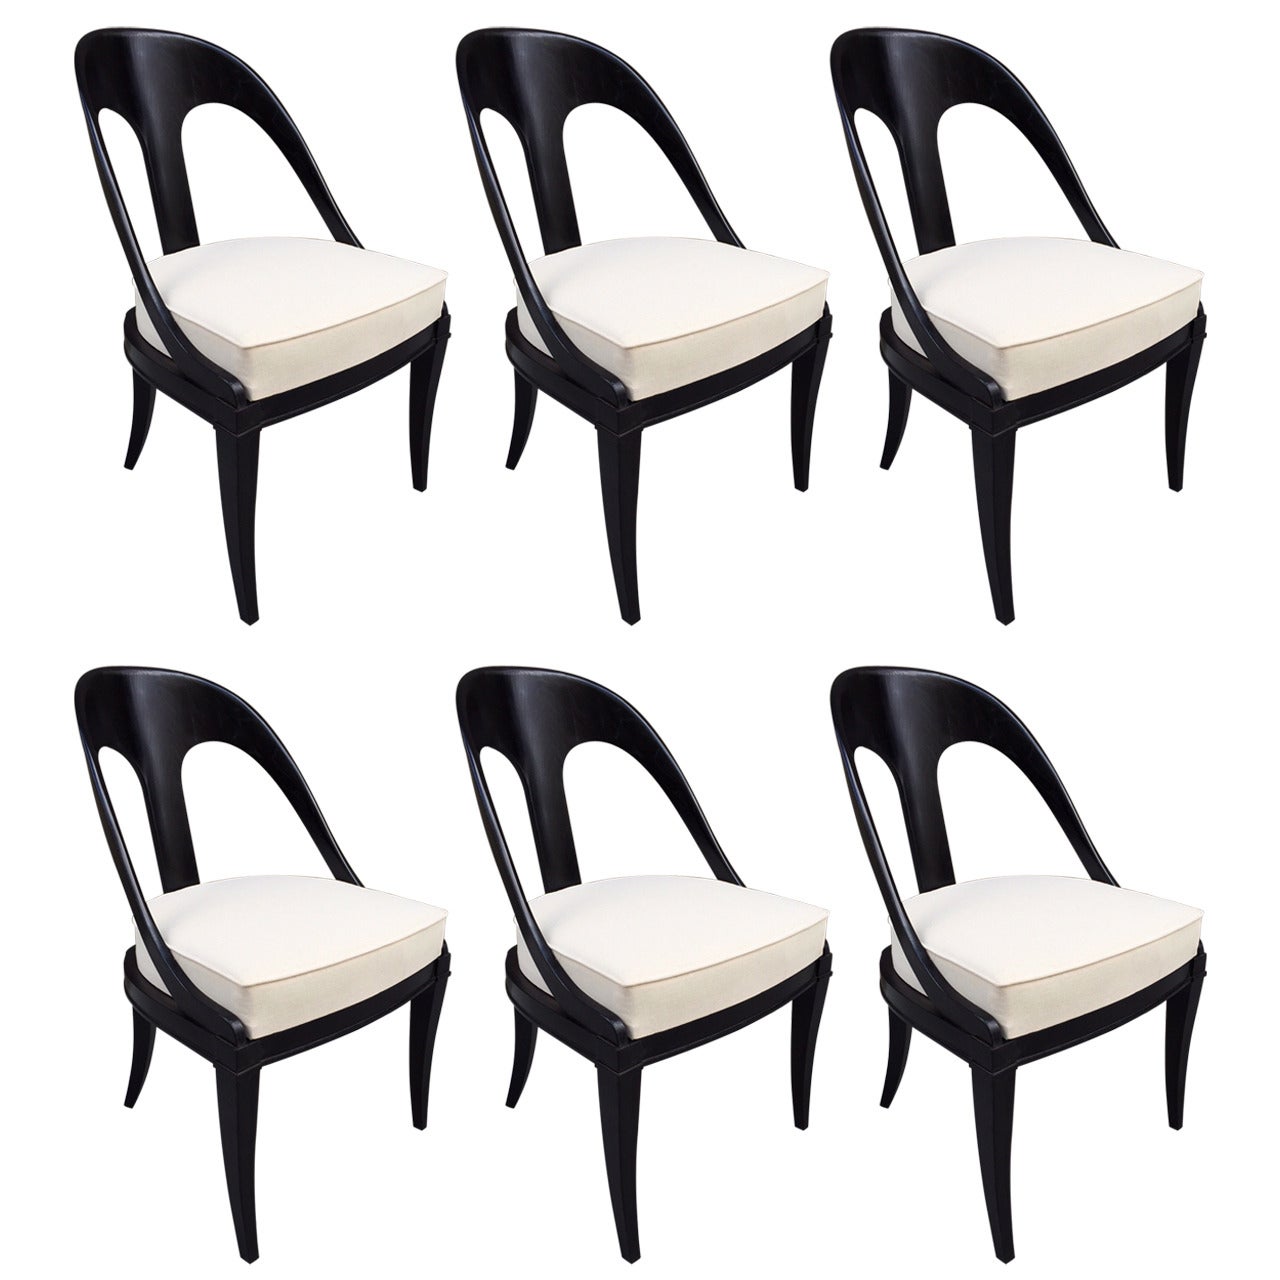 Six Neoclassical Style Lacquered Spoon Back Chairs